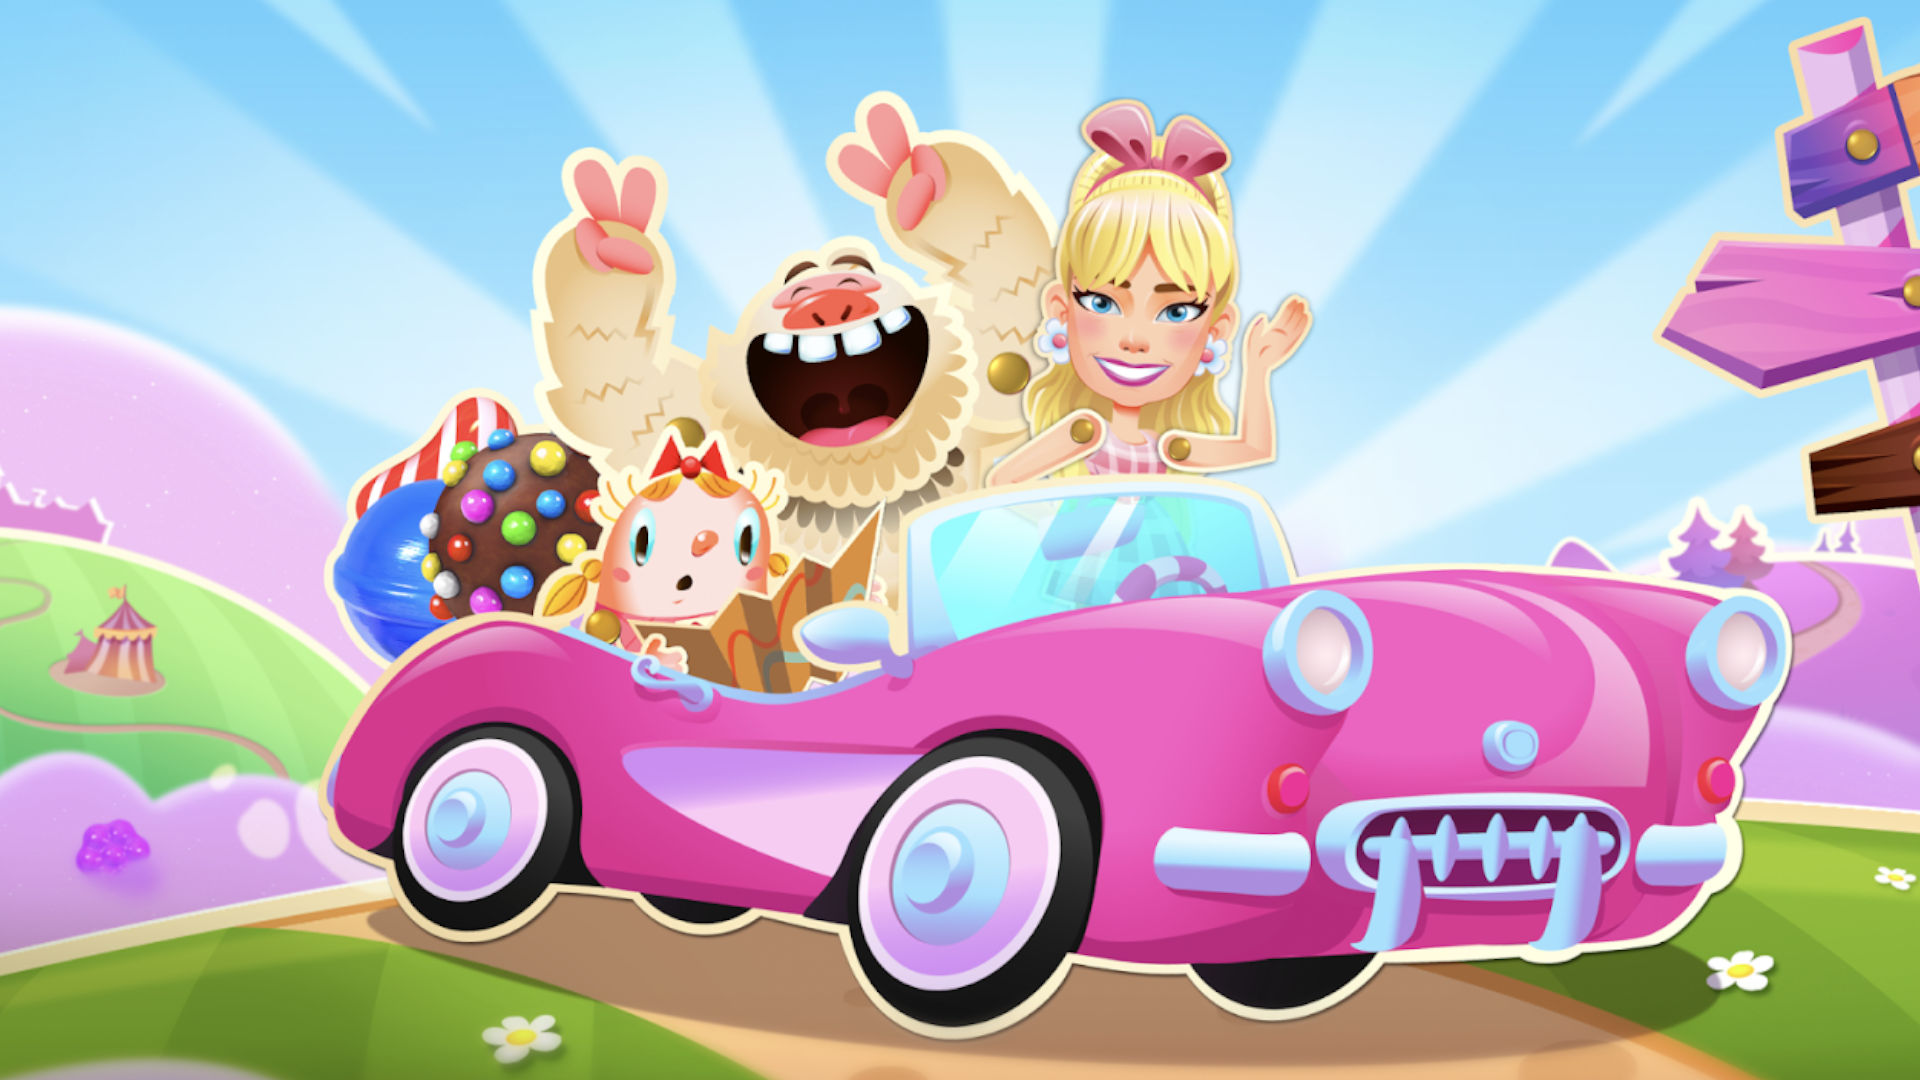 Candy Crush Apk Download for Android- Latest version 1.52.2.0-  com.king.candycrushsagakakao